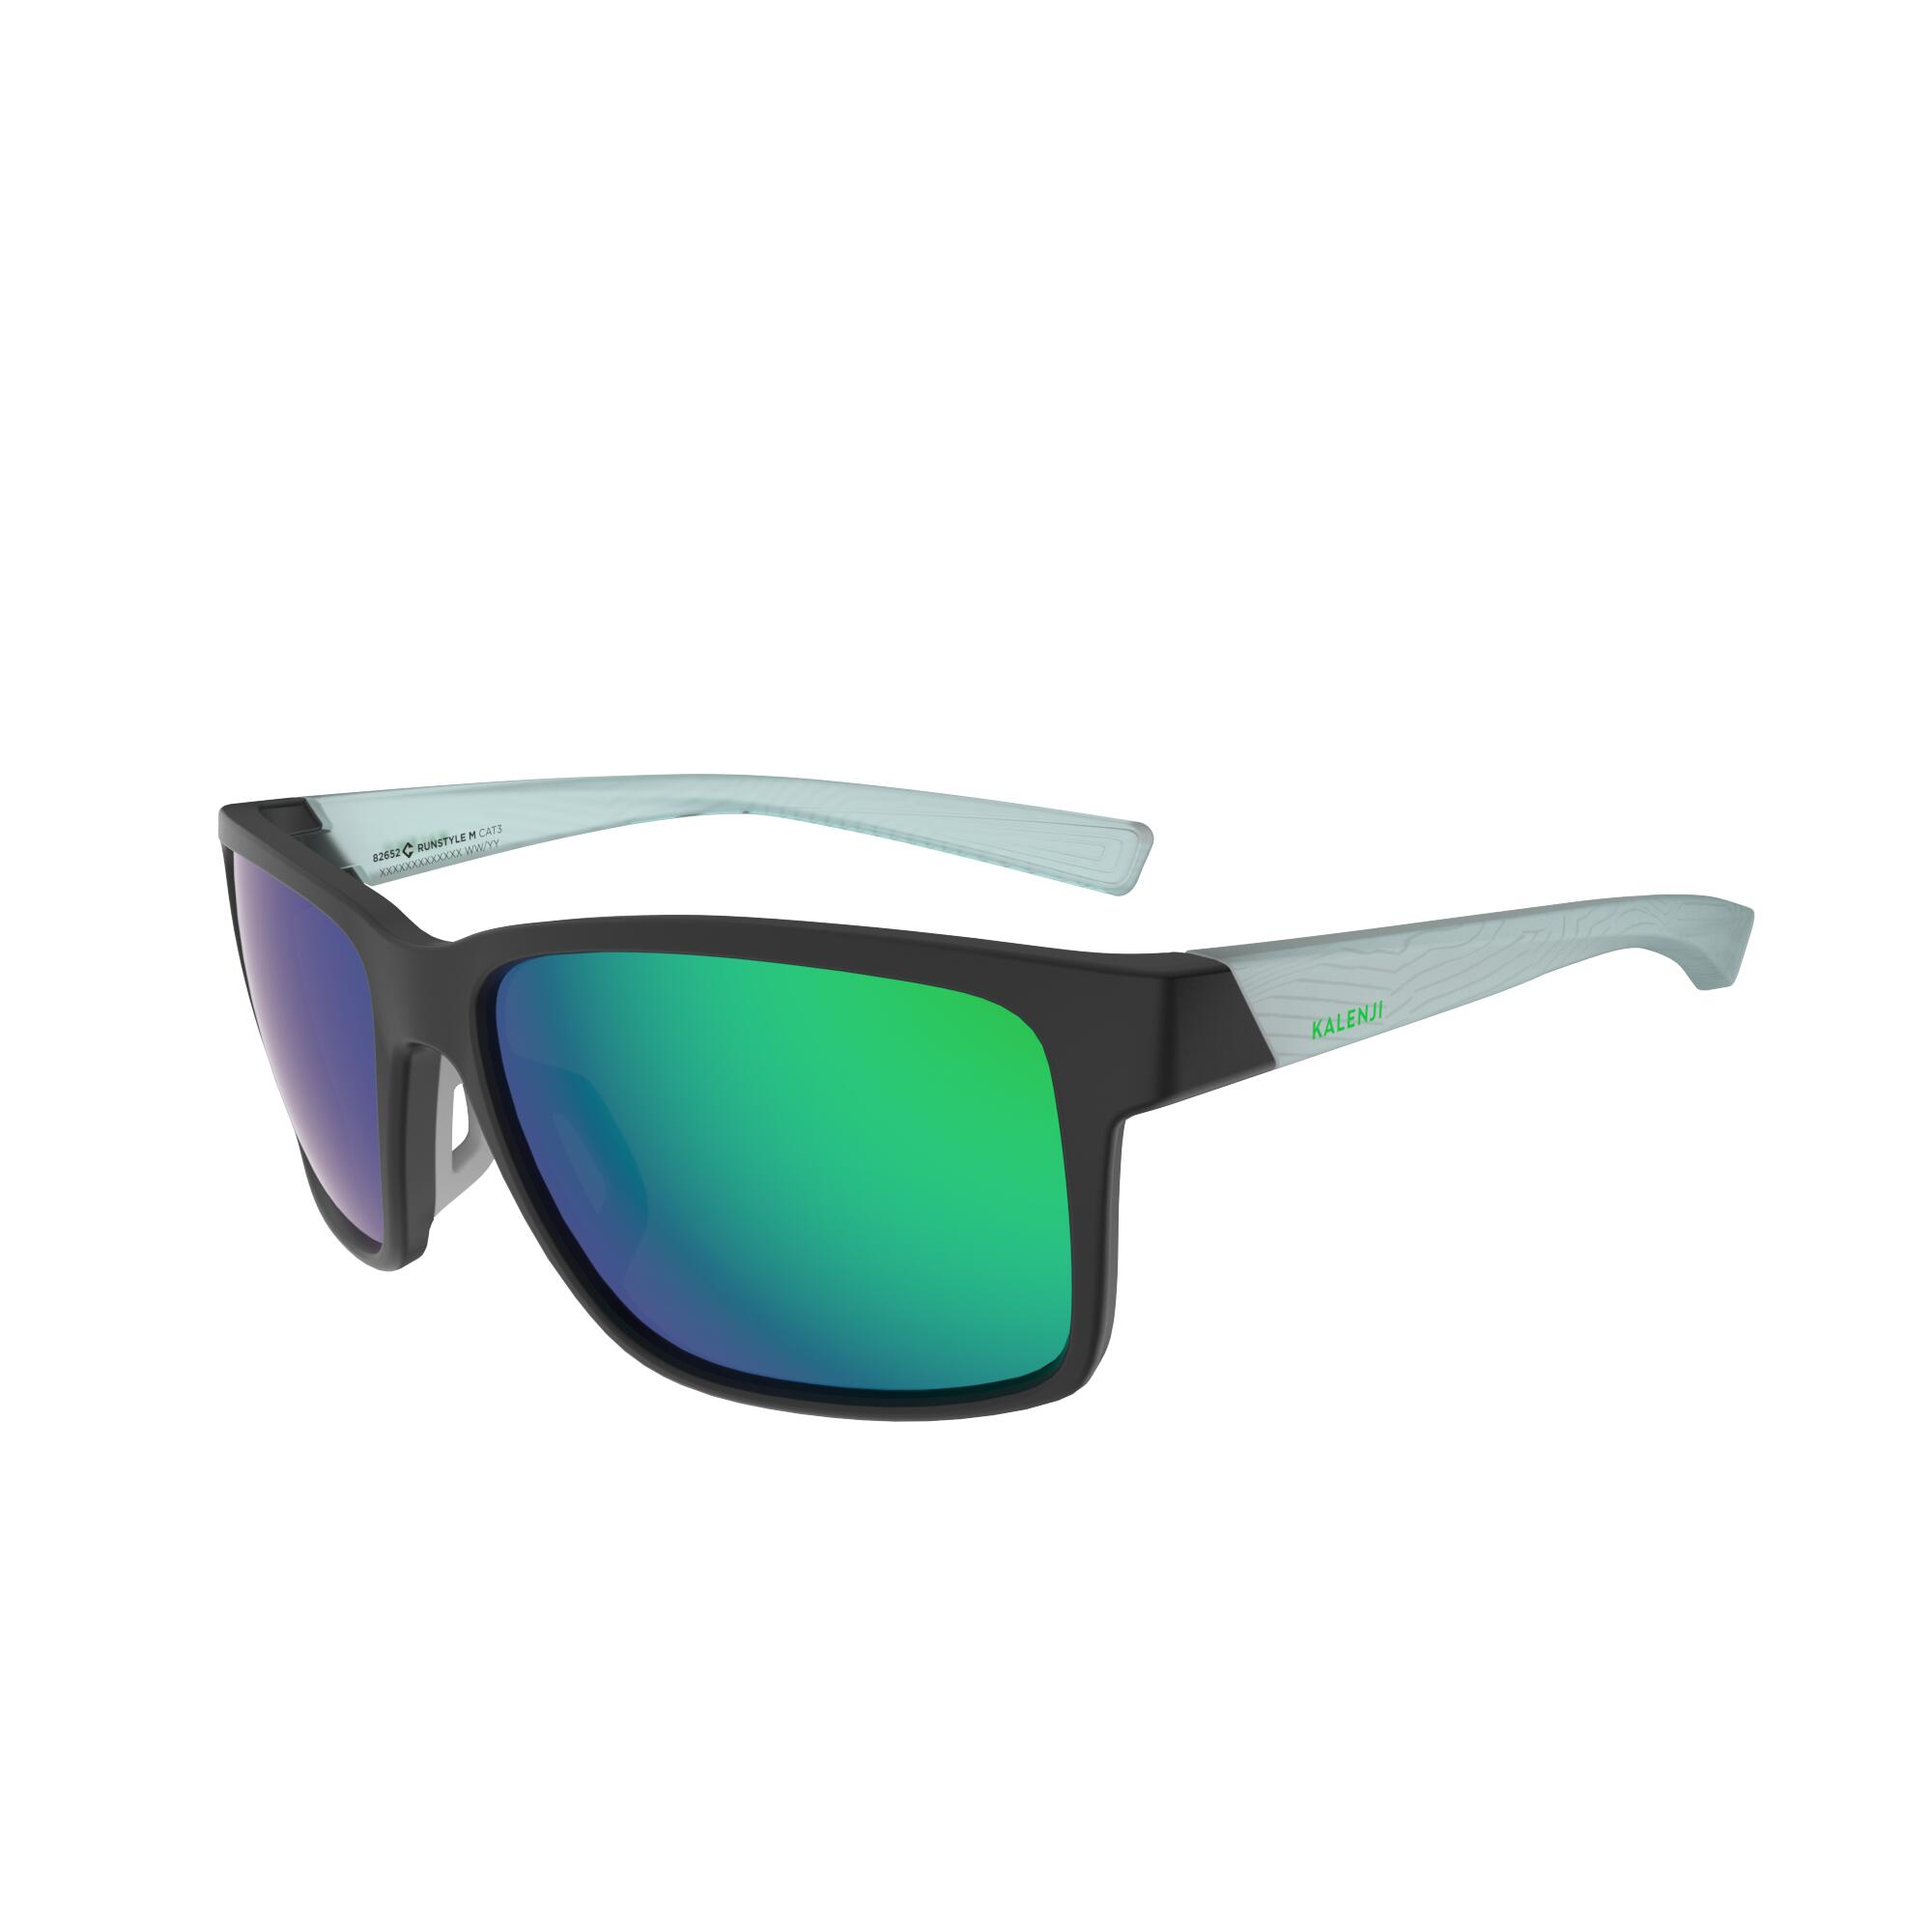 Running Sunglasses - High Quality Protection